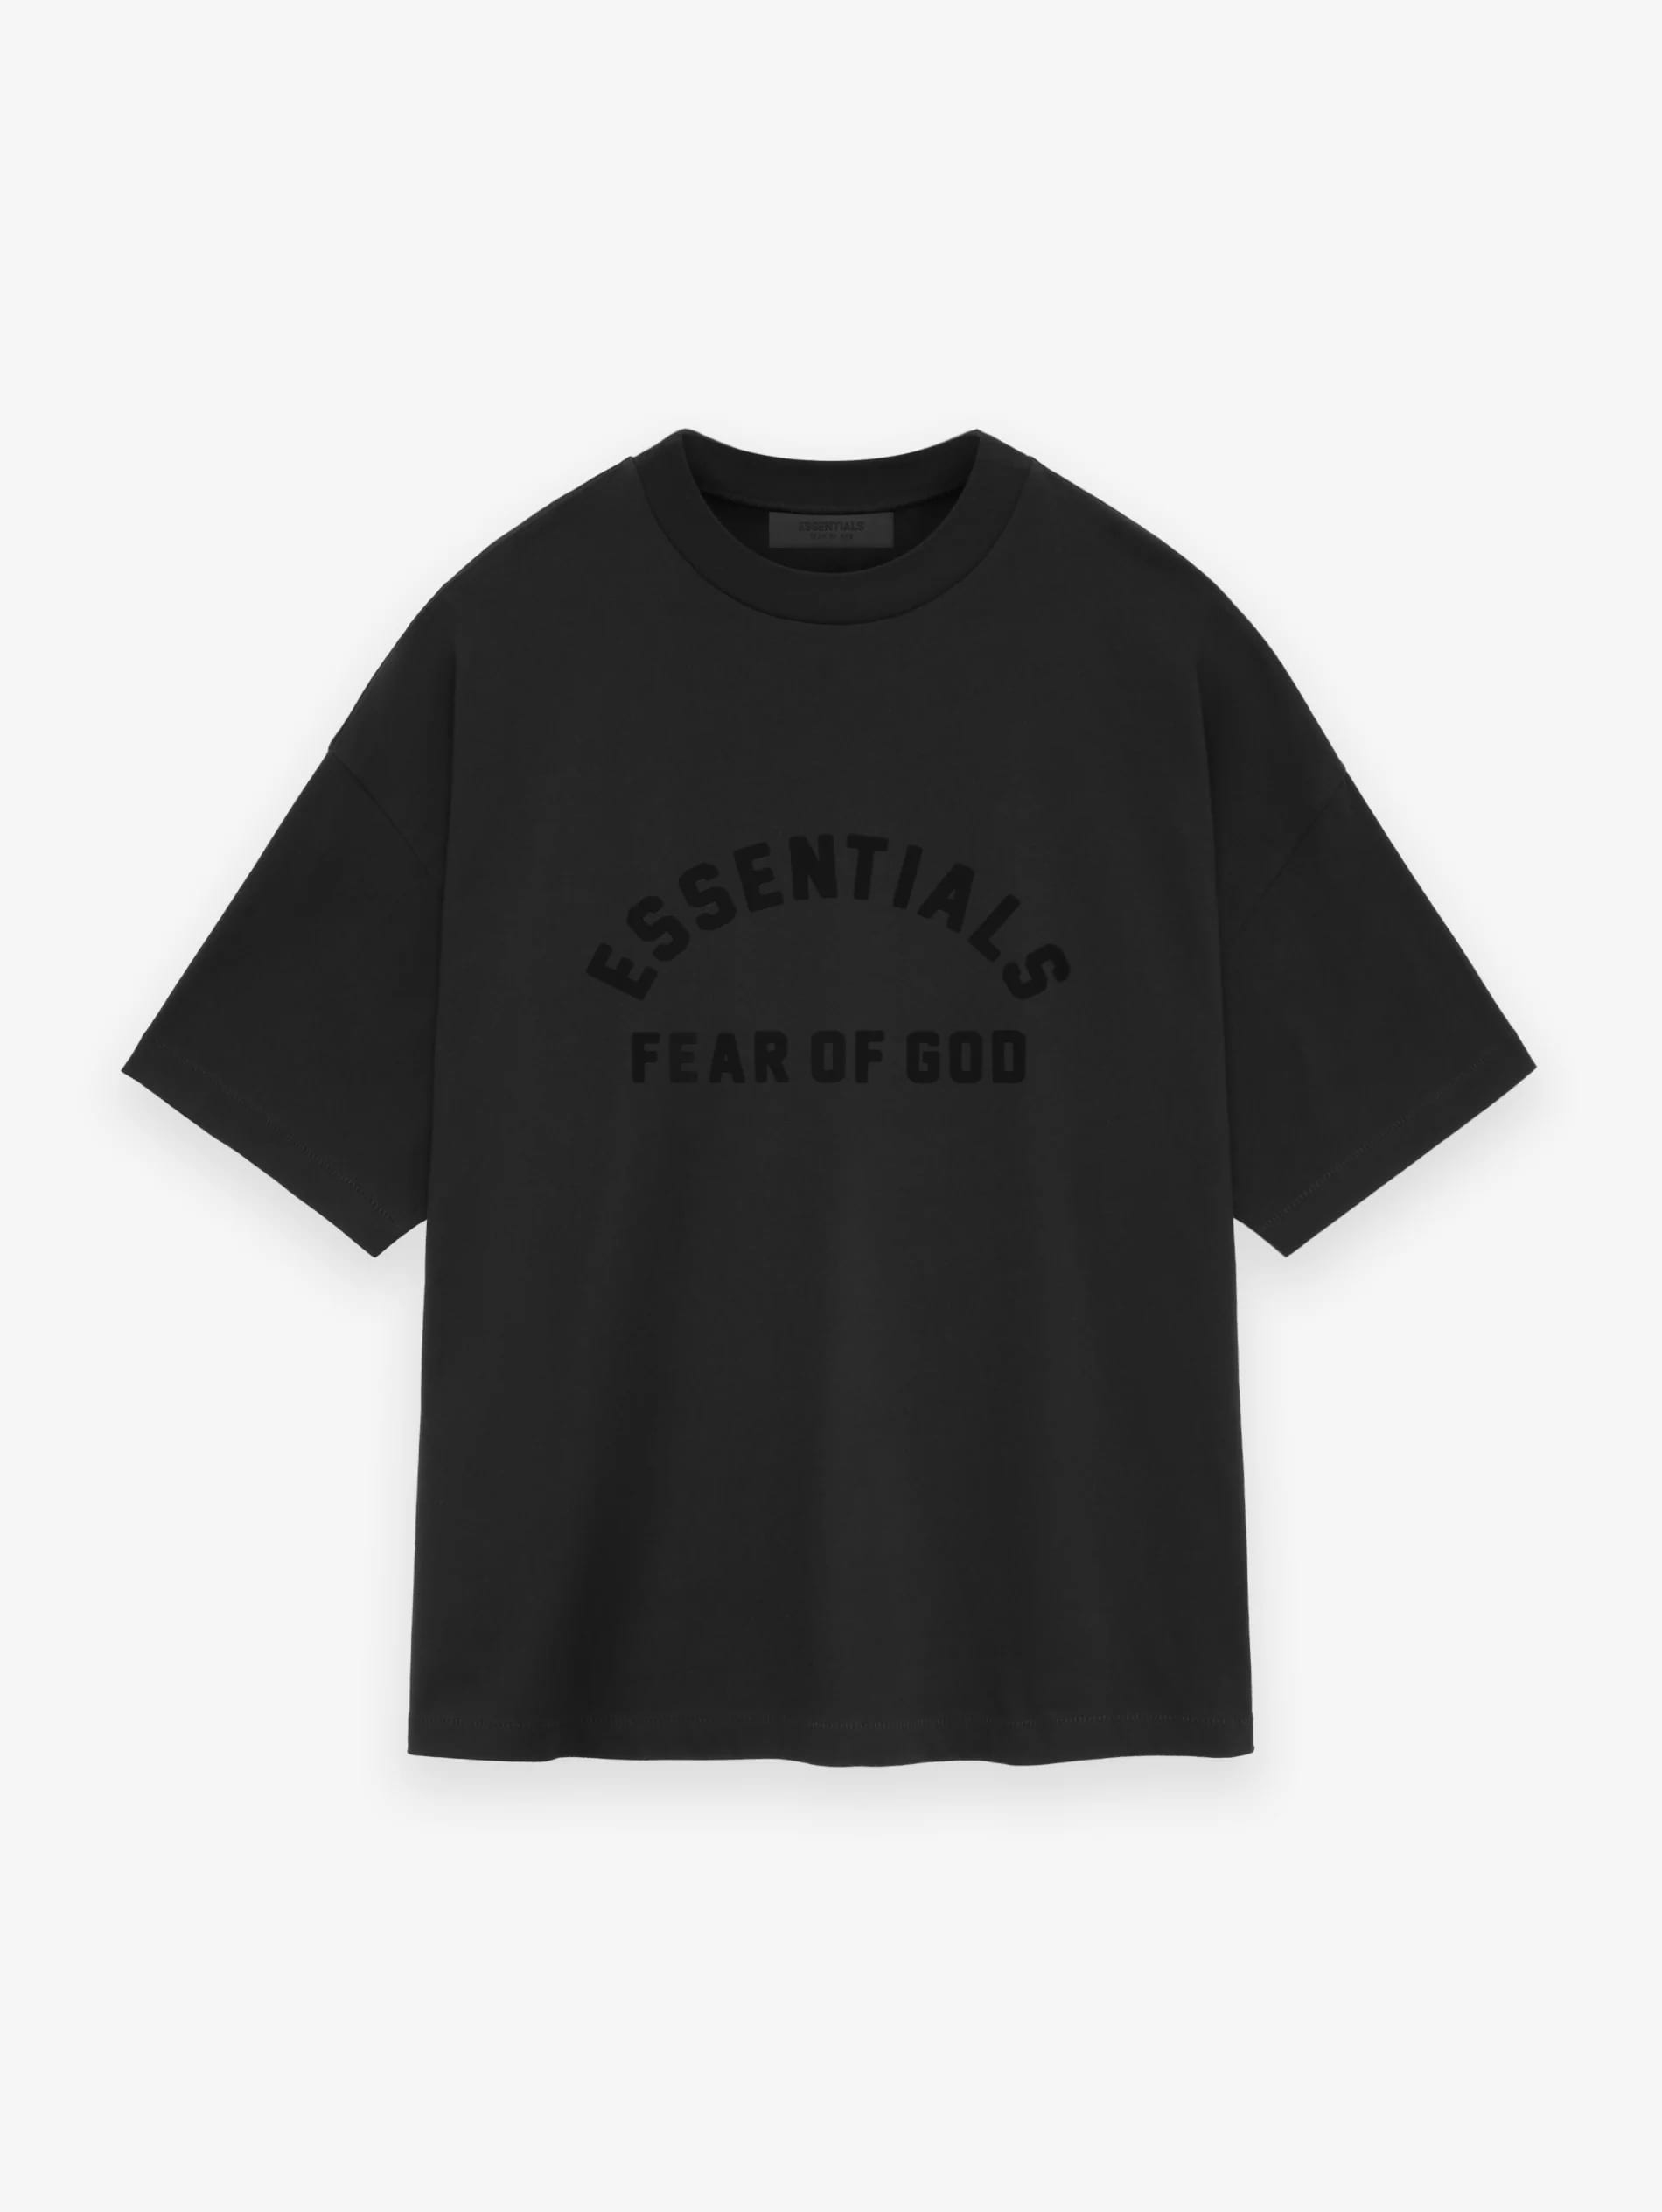 ESSENTIALS by FEAR OF GOD Essentials S/S Tee(S Black)｜ L.H.P ...